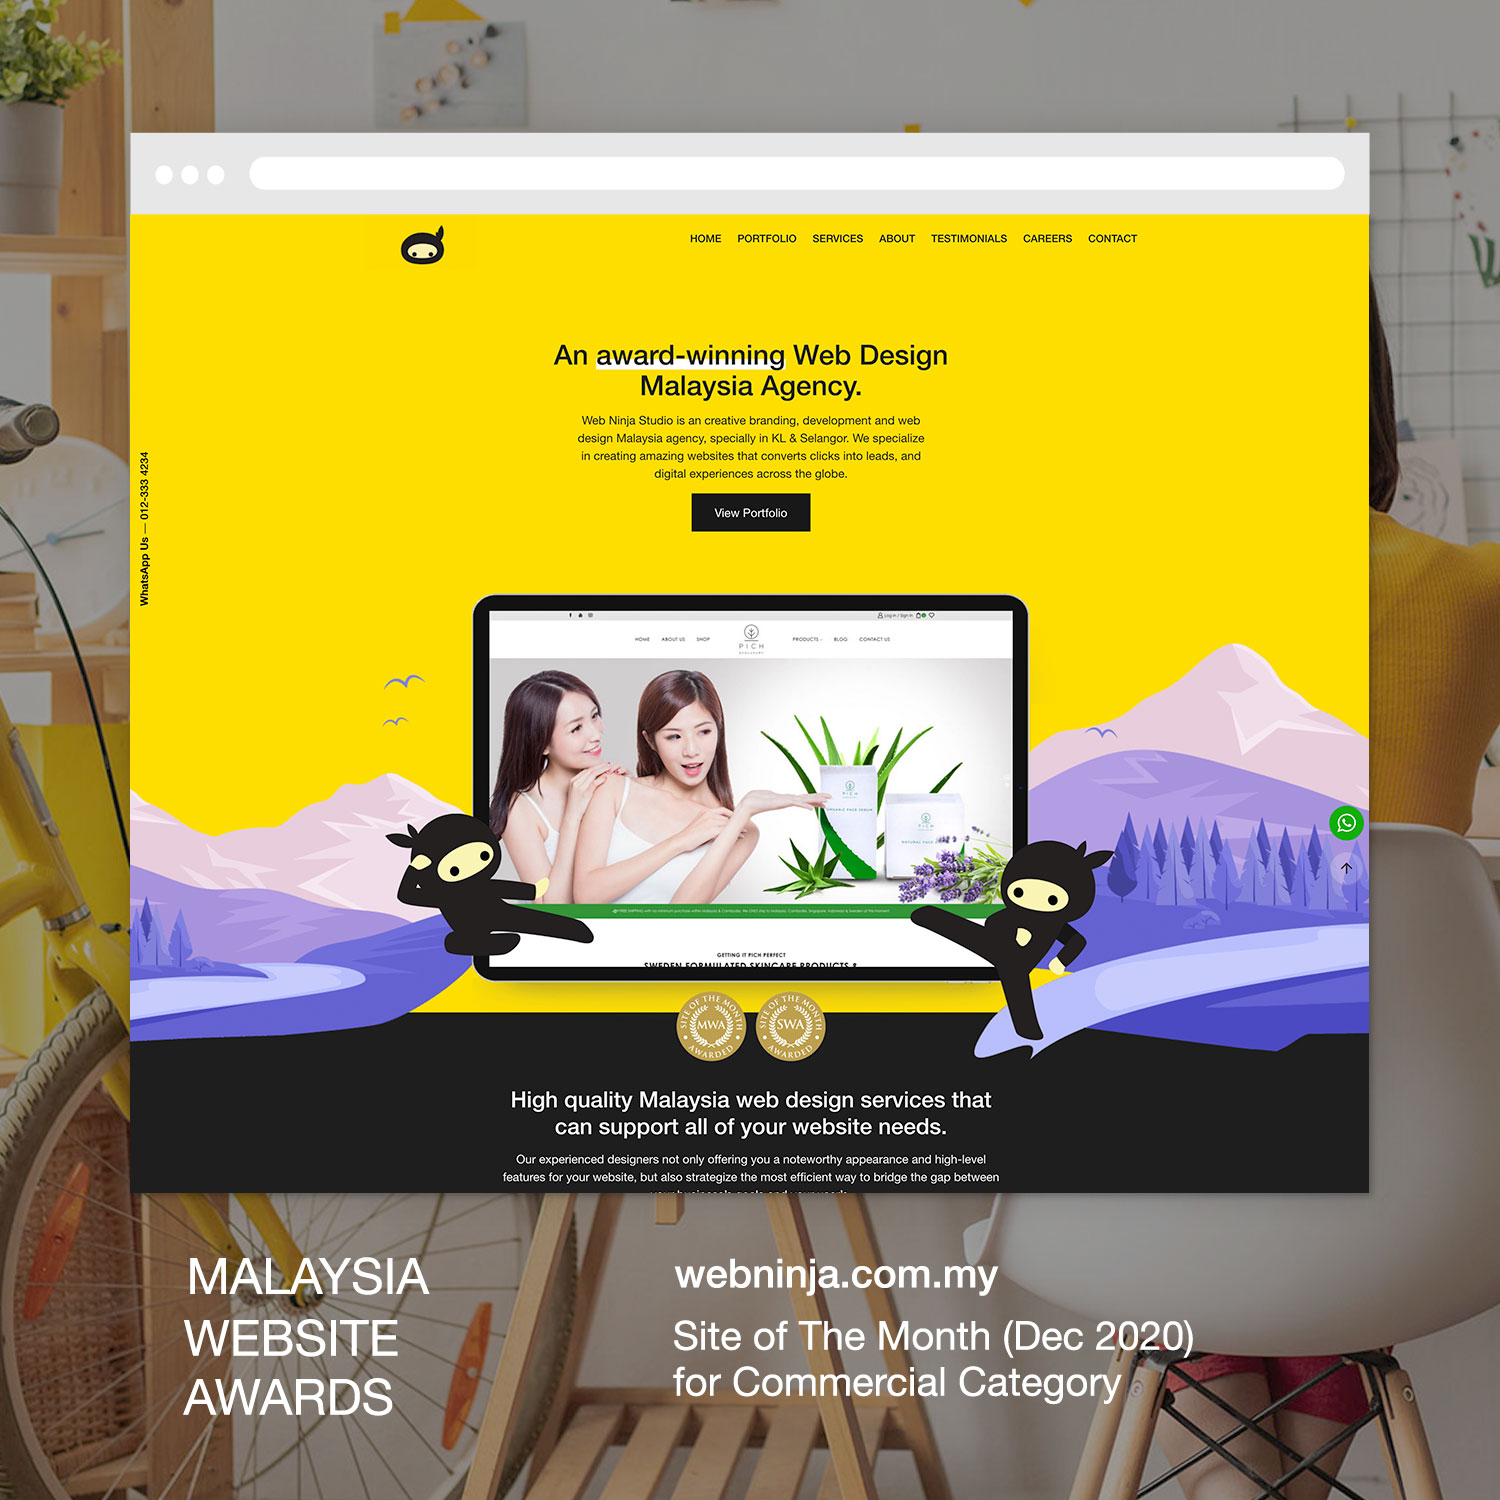 malaysia website awards - site of the month for Commercial category